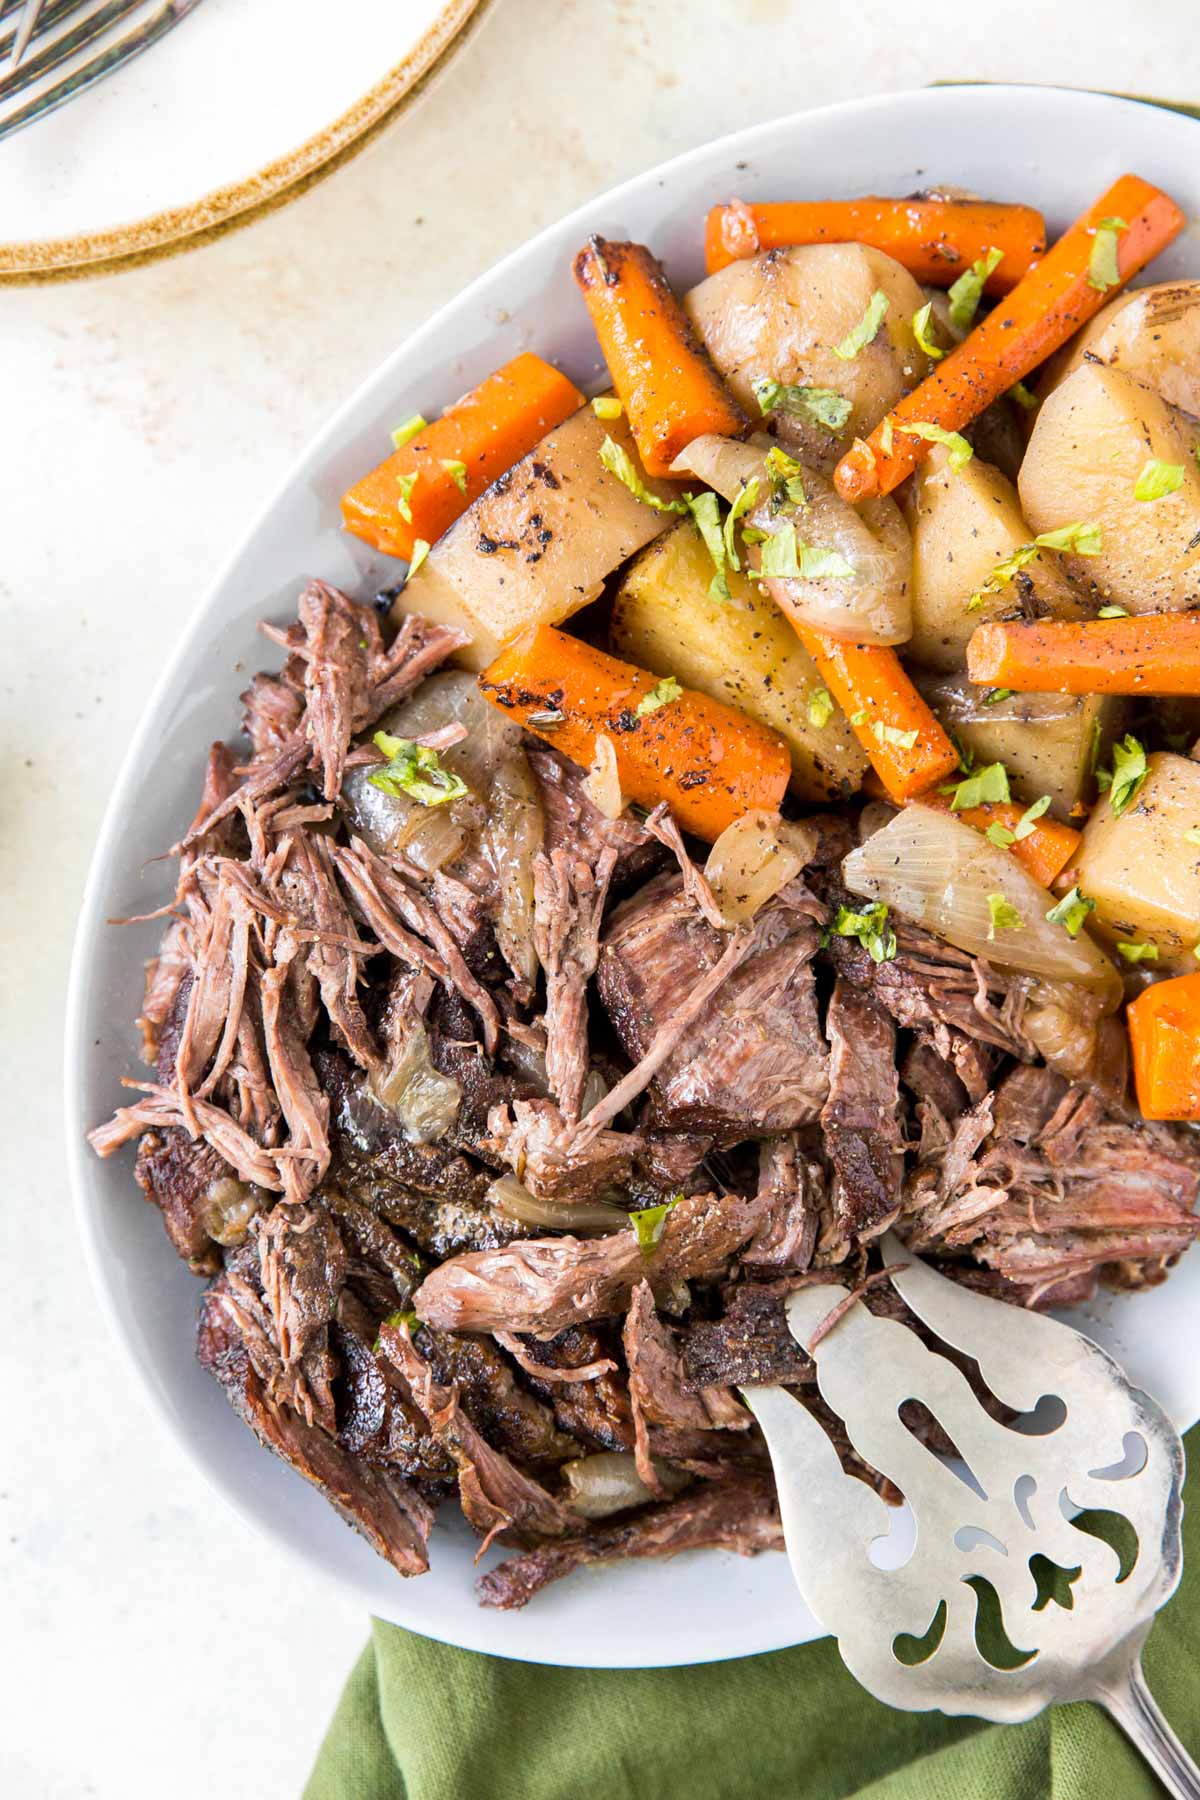 Dutch Oven Pot Roast : Jawns I Cooked